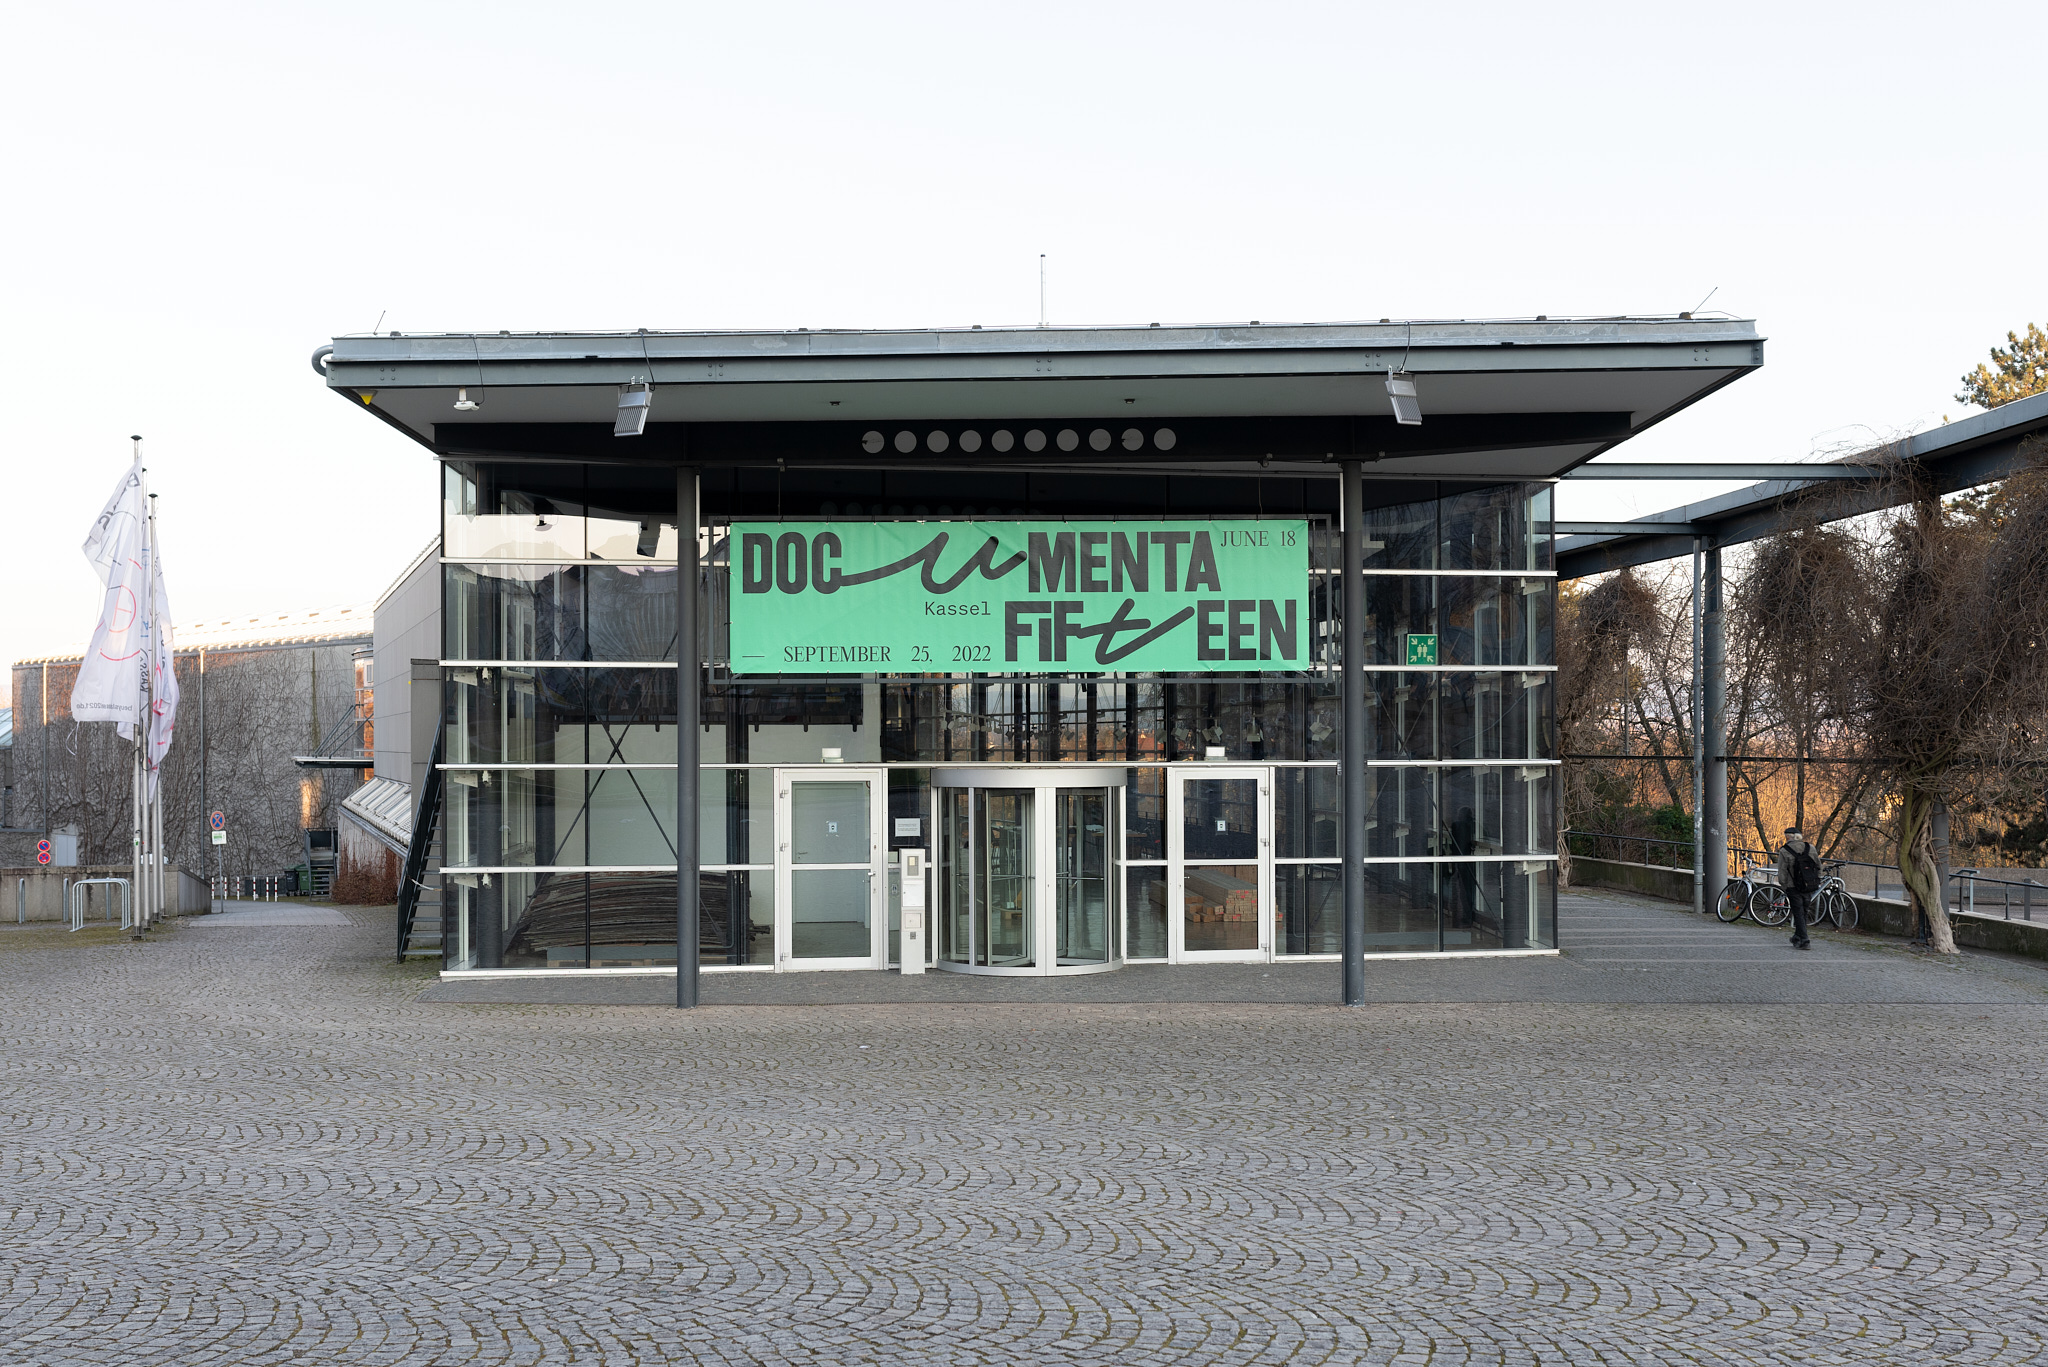 The photo shows the documenta Hallo with its large glass front, steel girders and a flat roof. A large green banner with the words "documenta fifteen" hangs in front of the revolving entrance door.